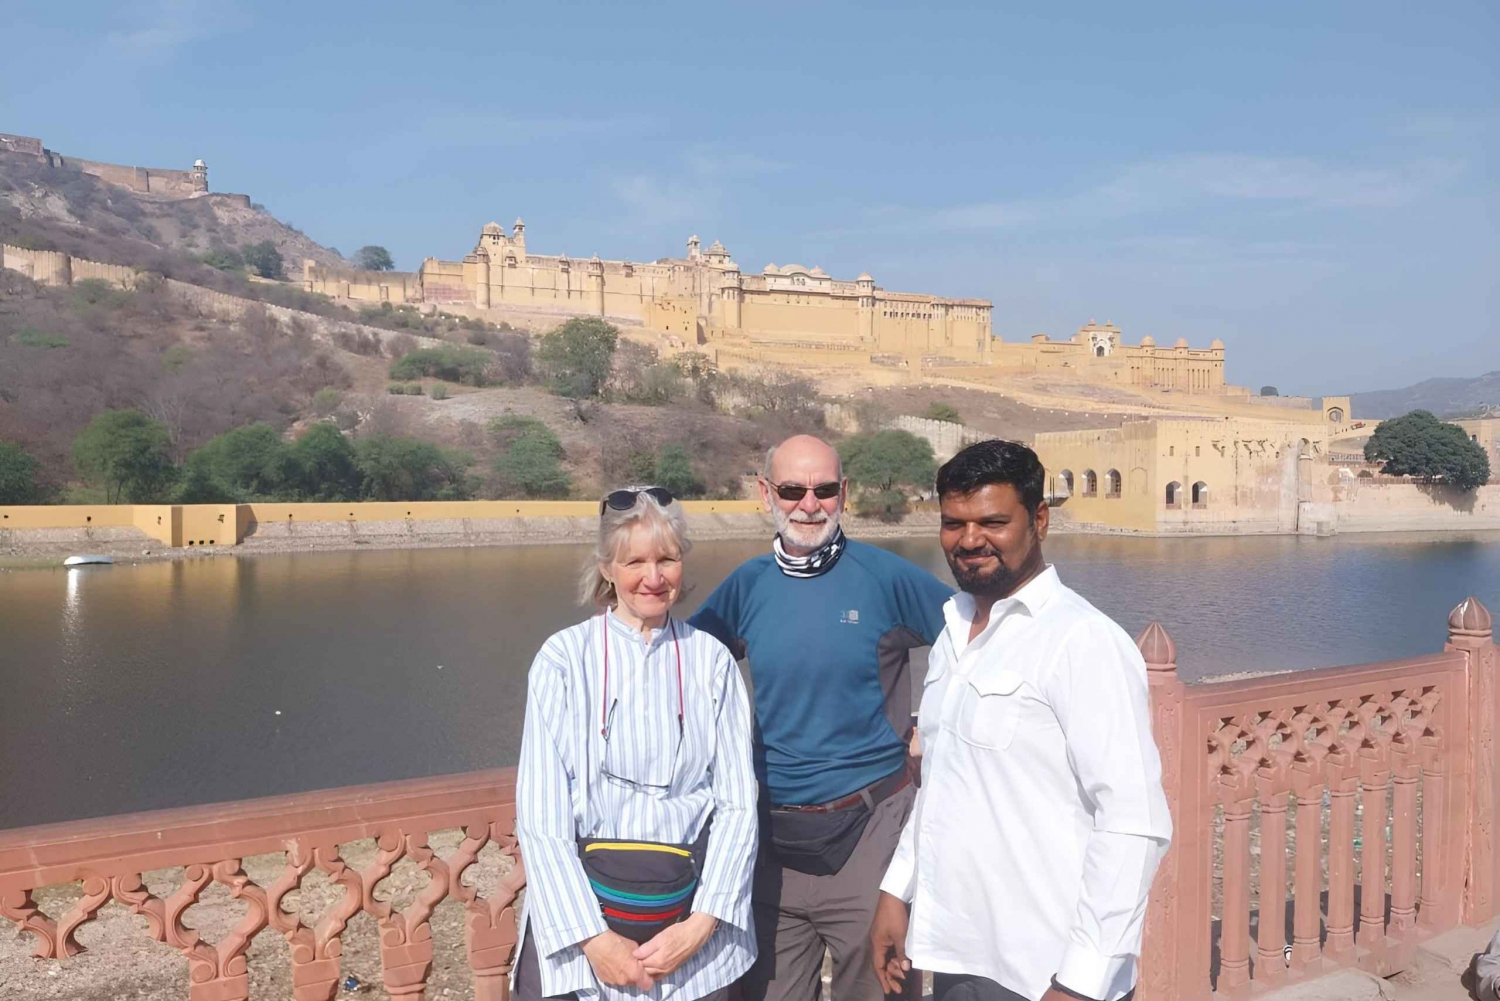 Jaipur: Discover the City's Rich History & Iconic Landmarks